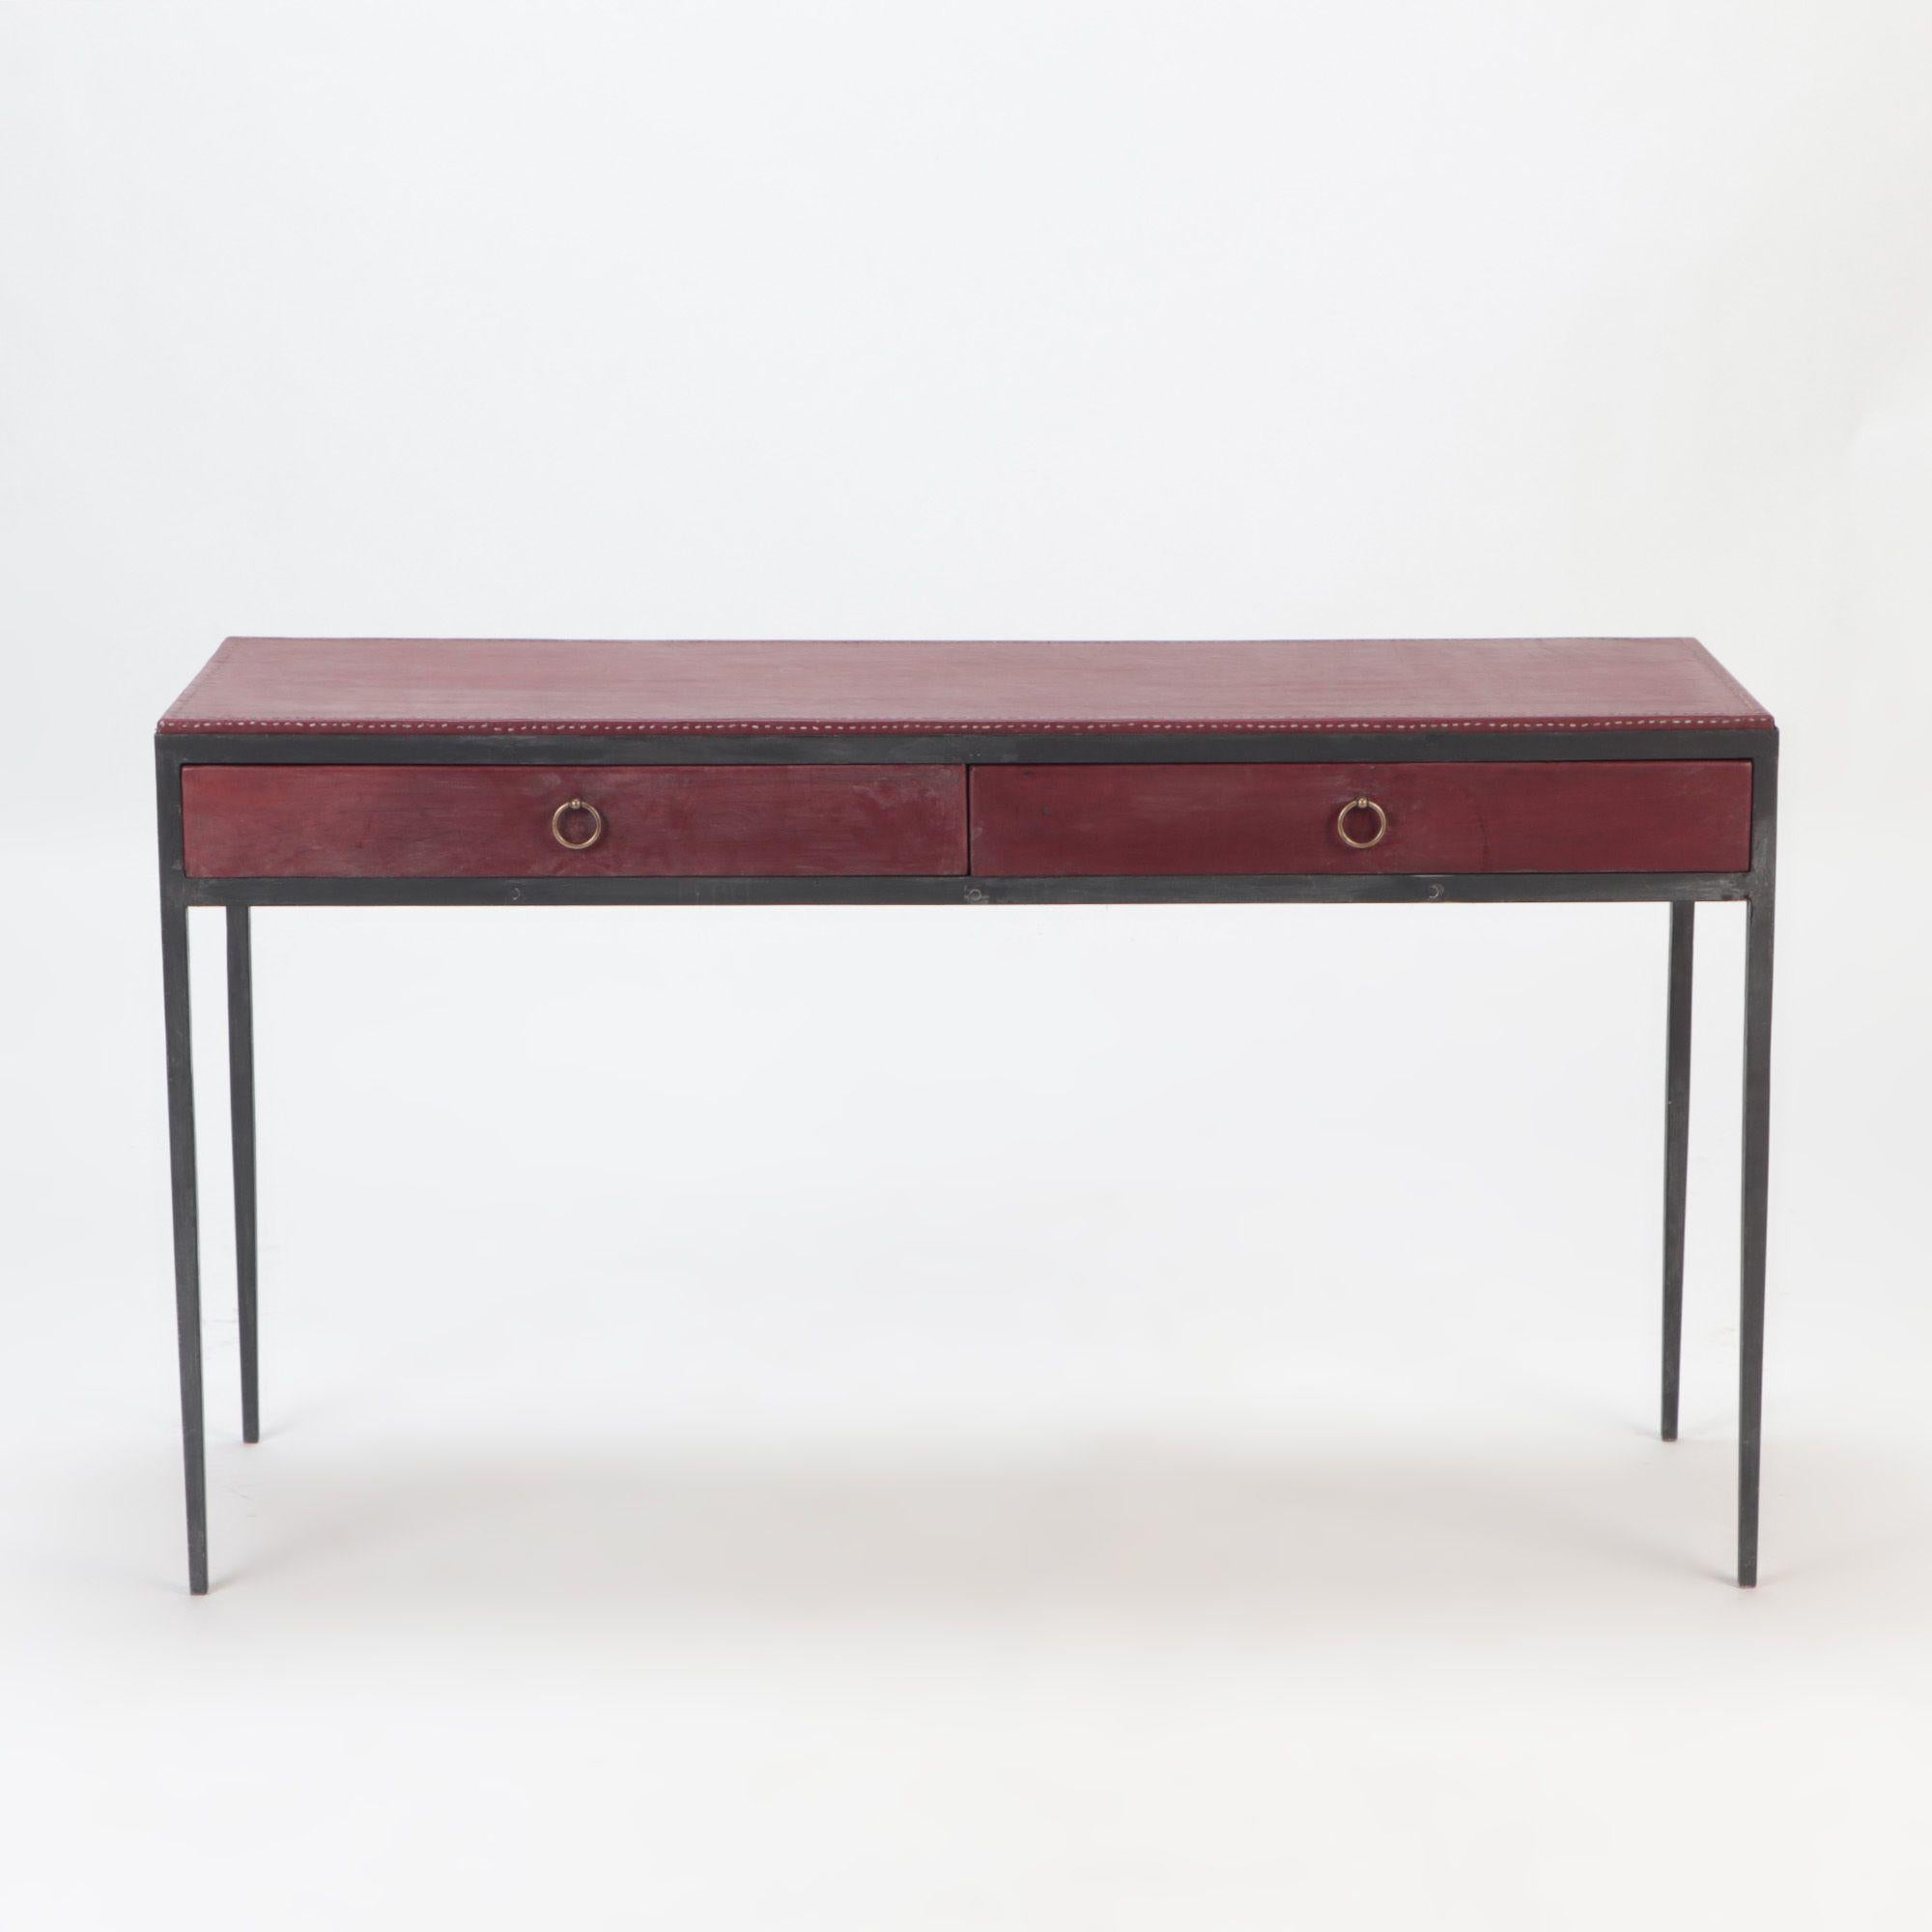 An iron and burgundy leather writing desk in the manner of Jean-Michel Frank. Contemporary. Two drawers with brass handles.